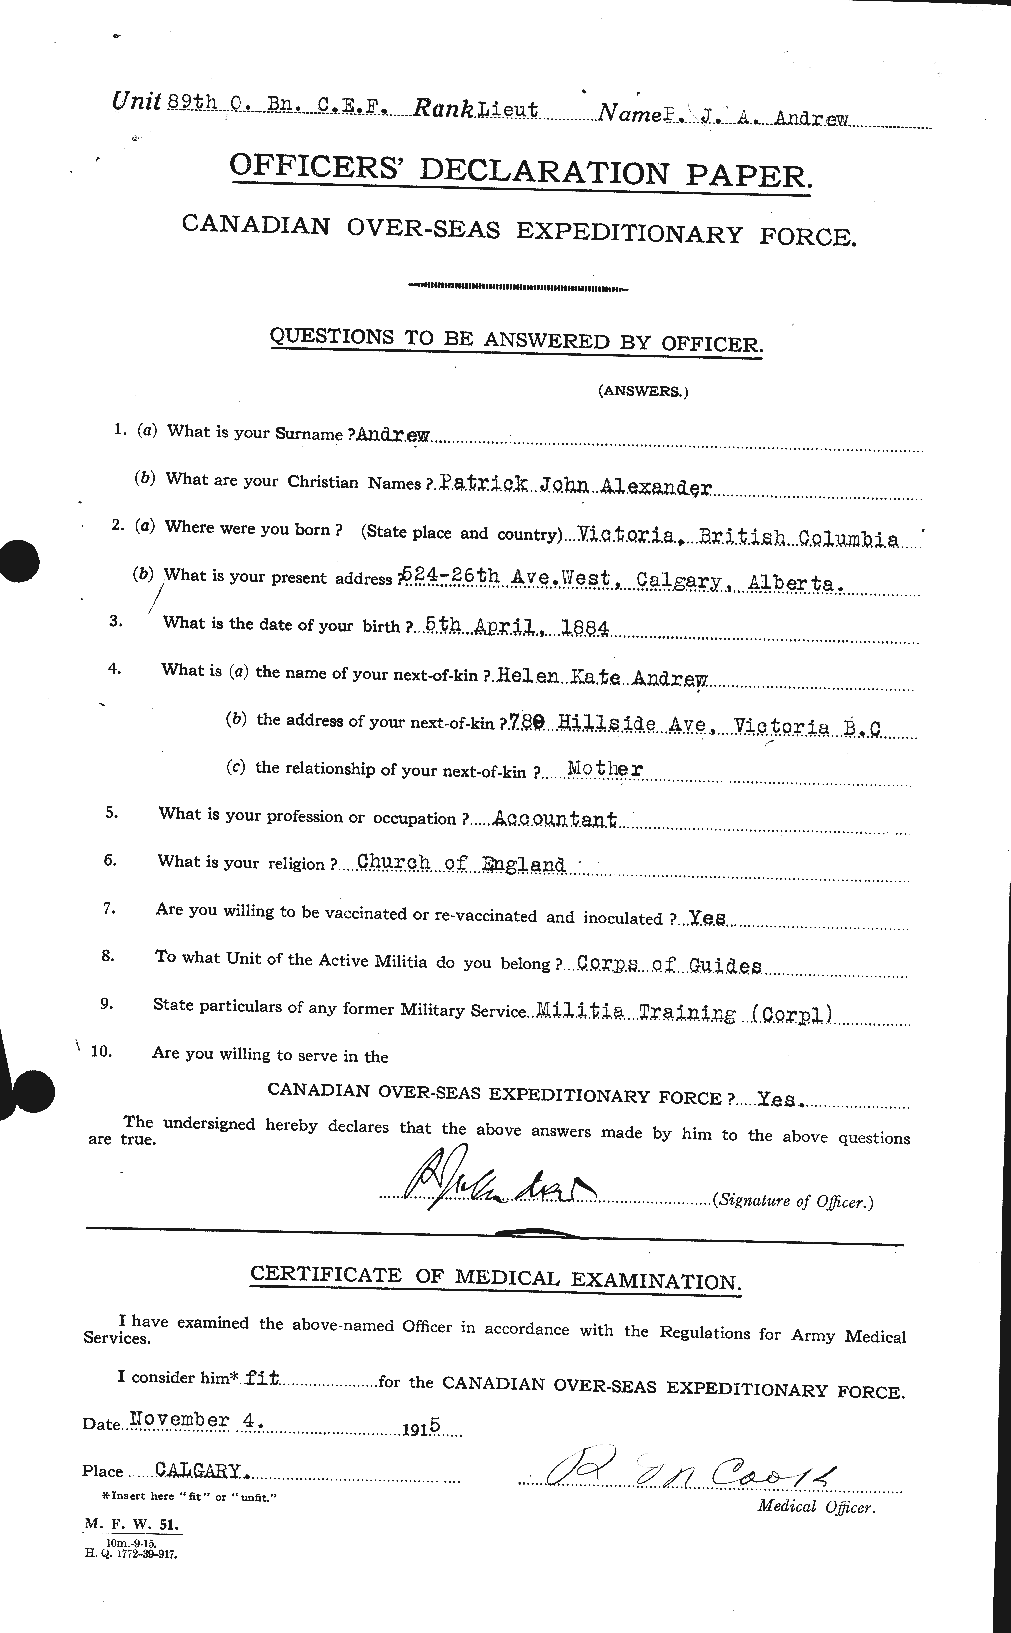 Personnel Records of the First World War - CEF 210498a